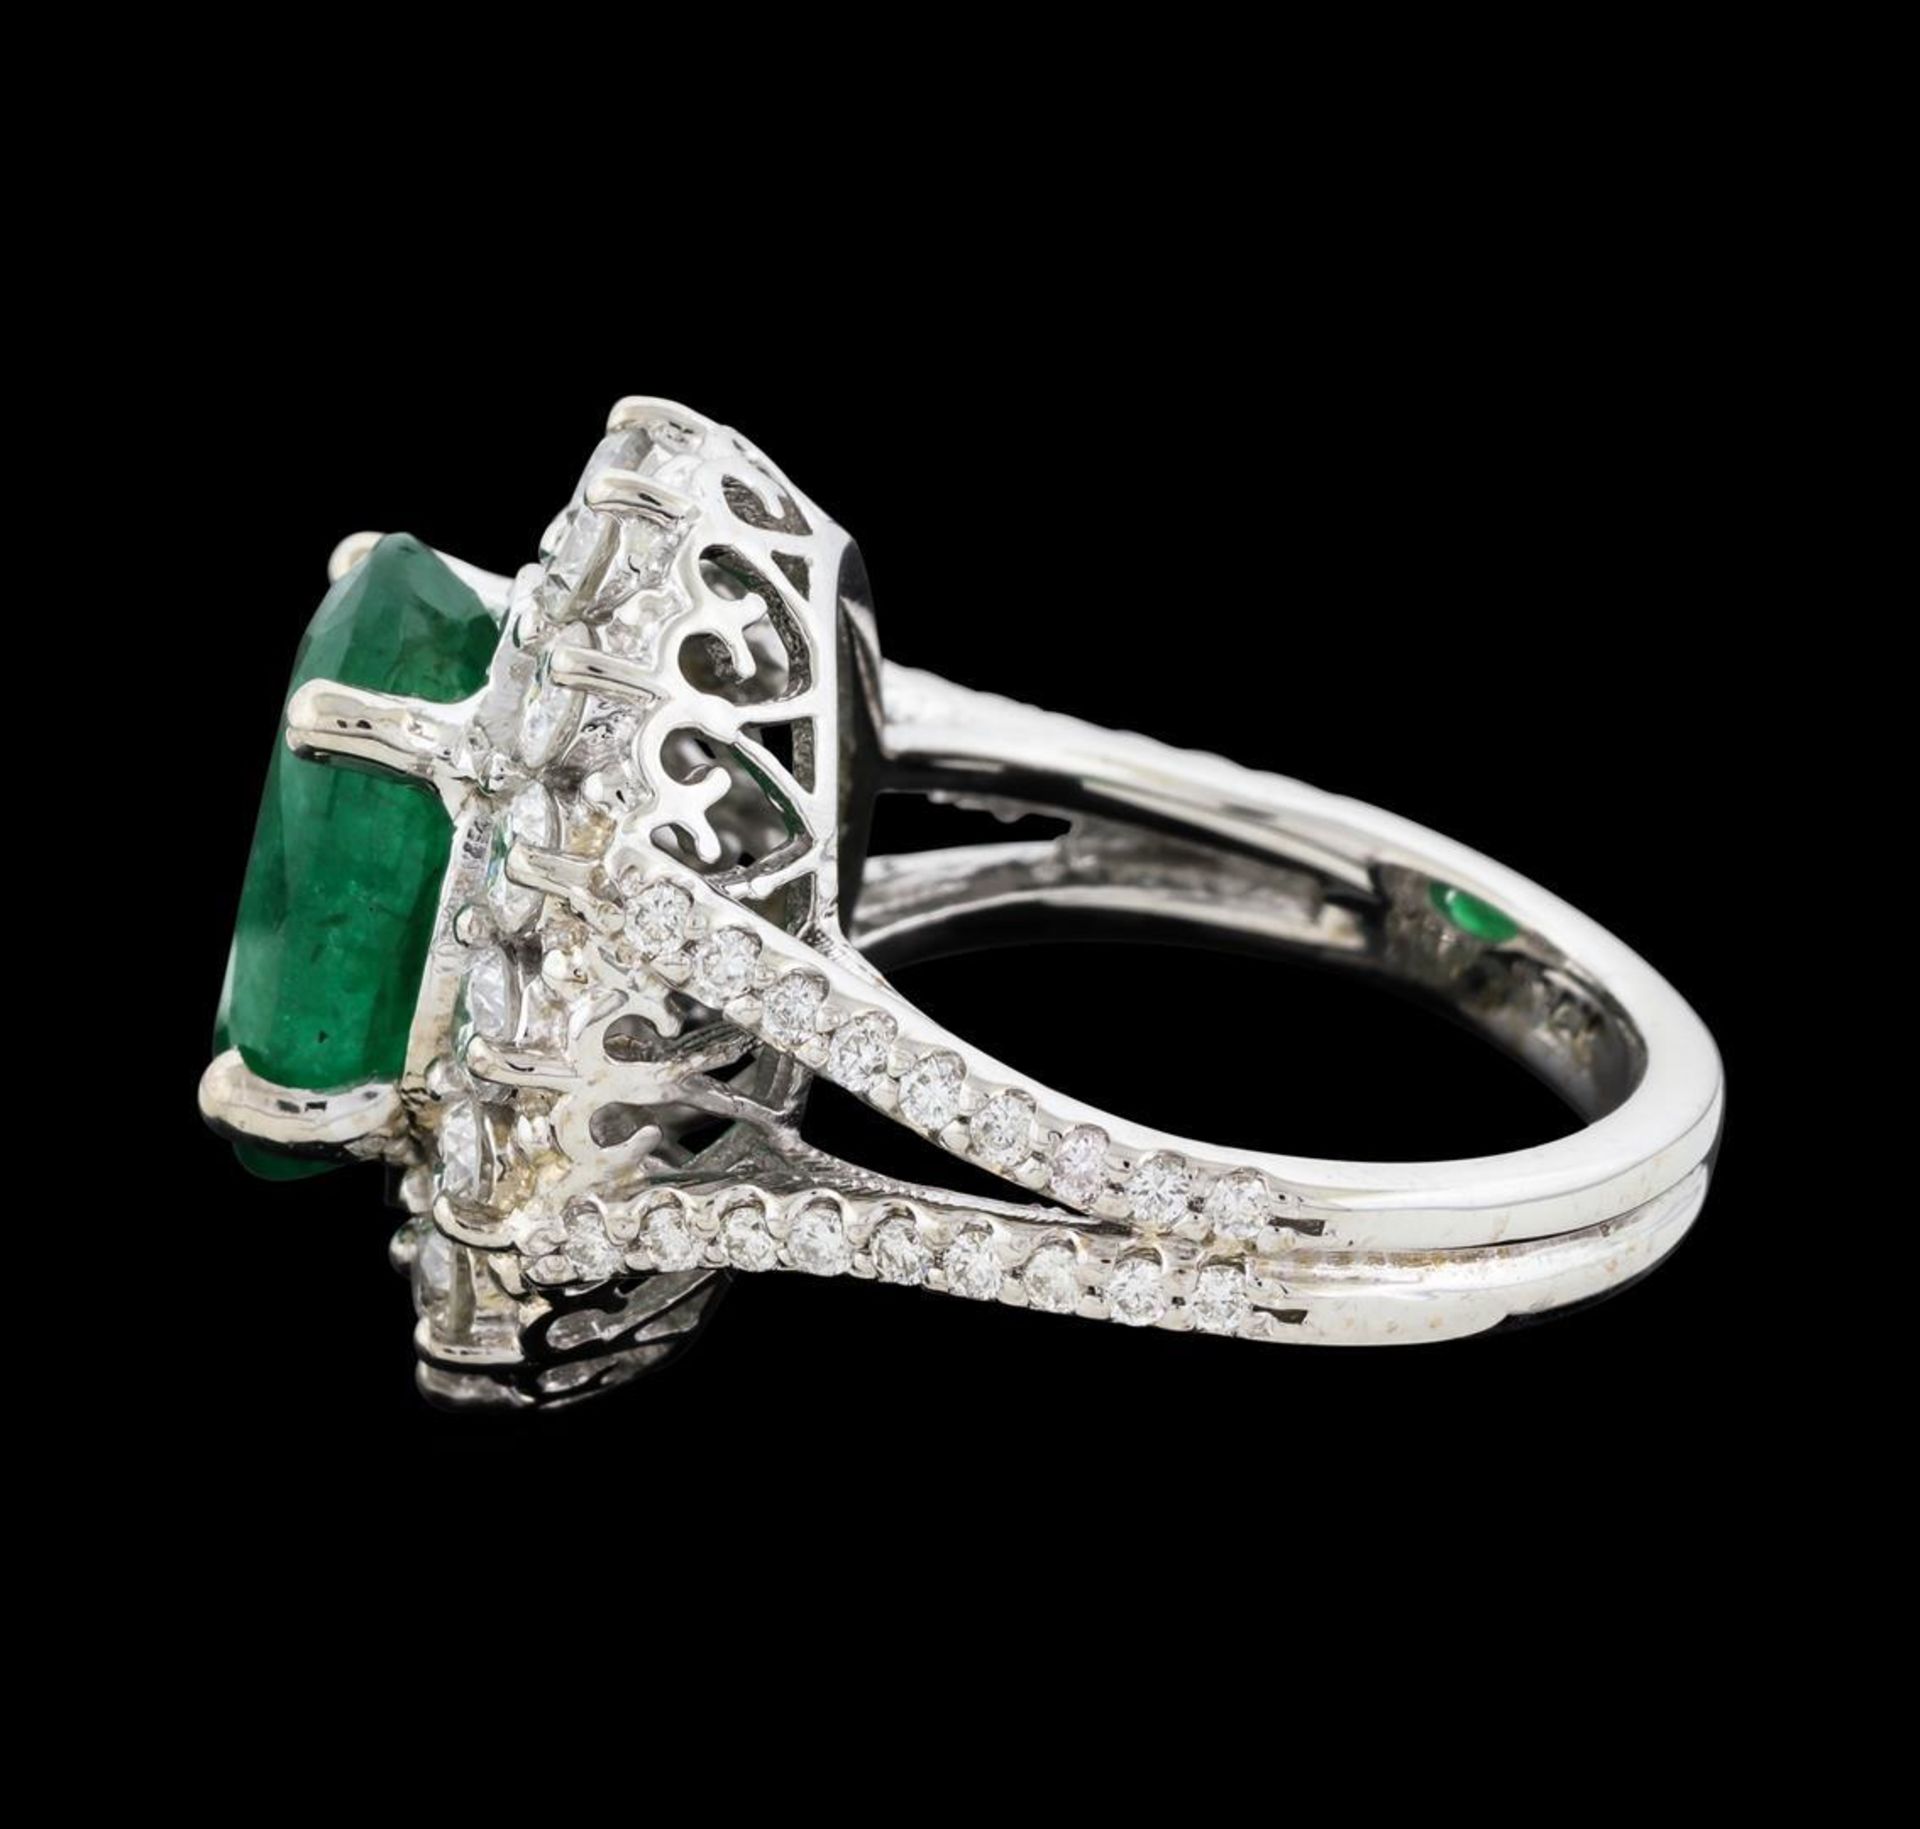 4.70 ctw Emerald and Diamond Ring - 14KT White Gold - Image 3 of 5